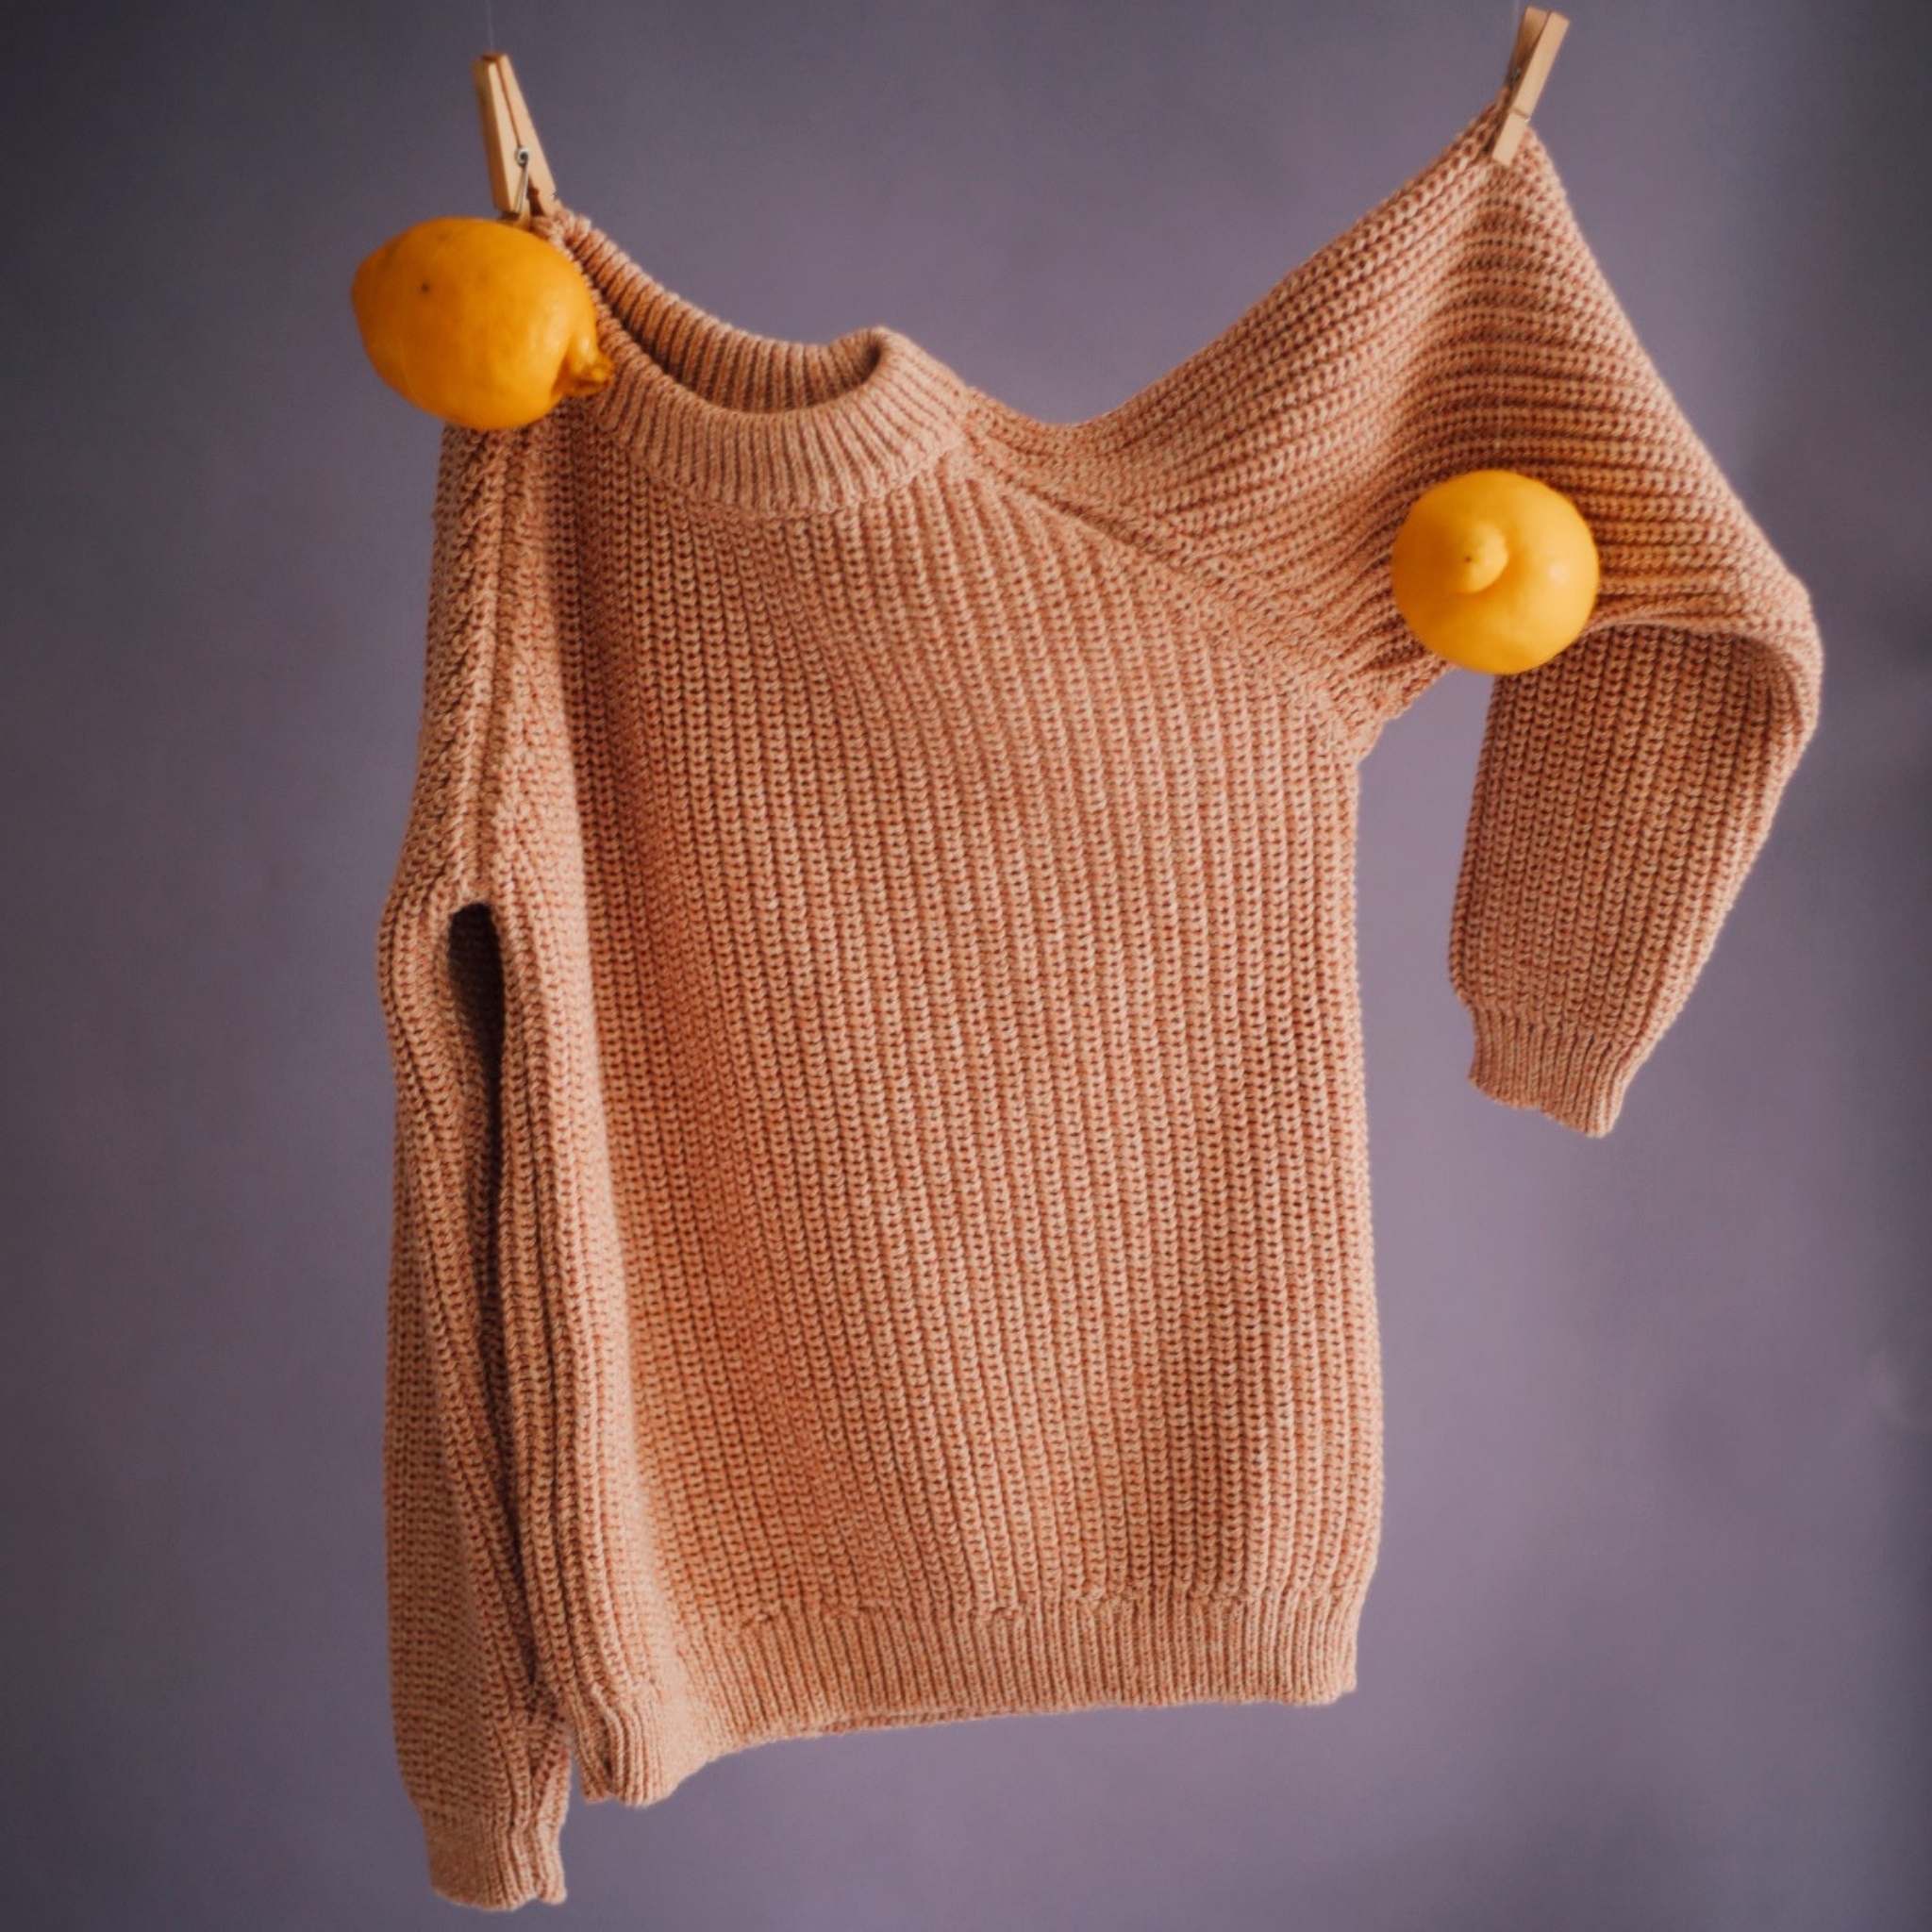 One of our best selling girls sweaters. Chunky knit, made from organic cotton yarn, in beautiful marled blush color. Made in NYC. 